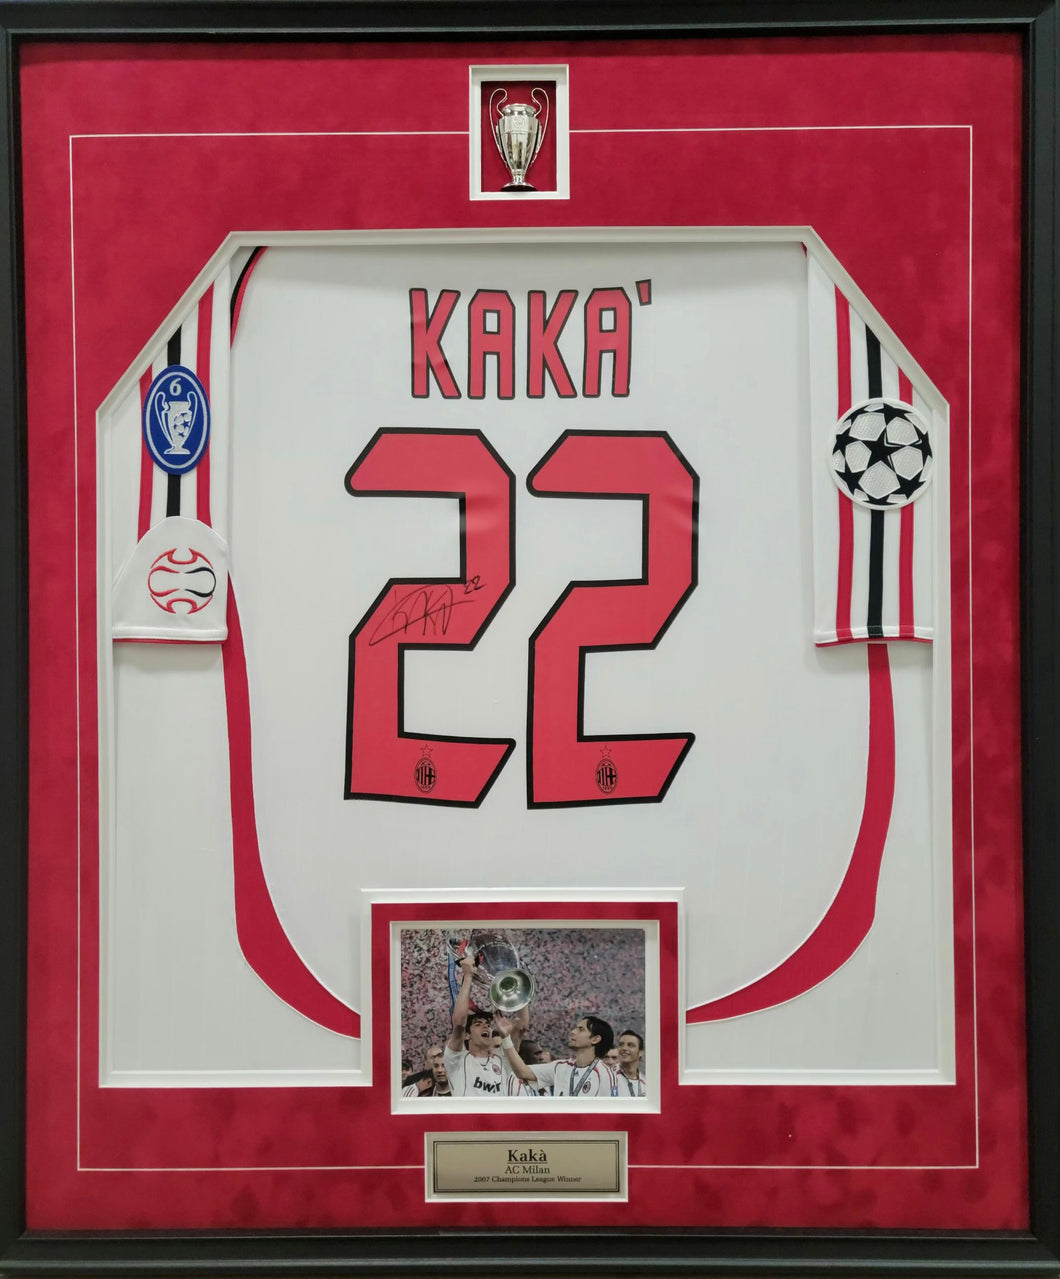 Kaka' Authentic AC Milan Signed & Framed Jersey